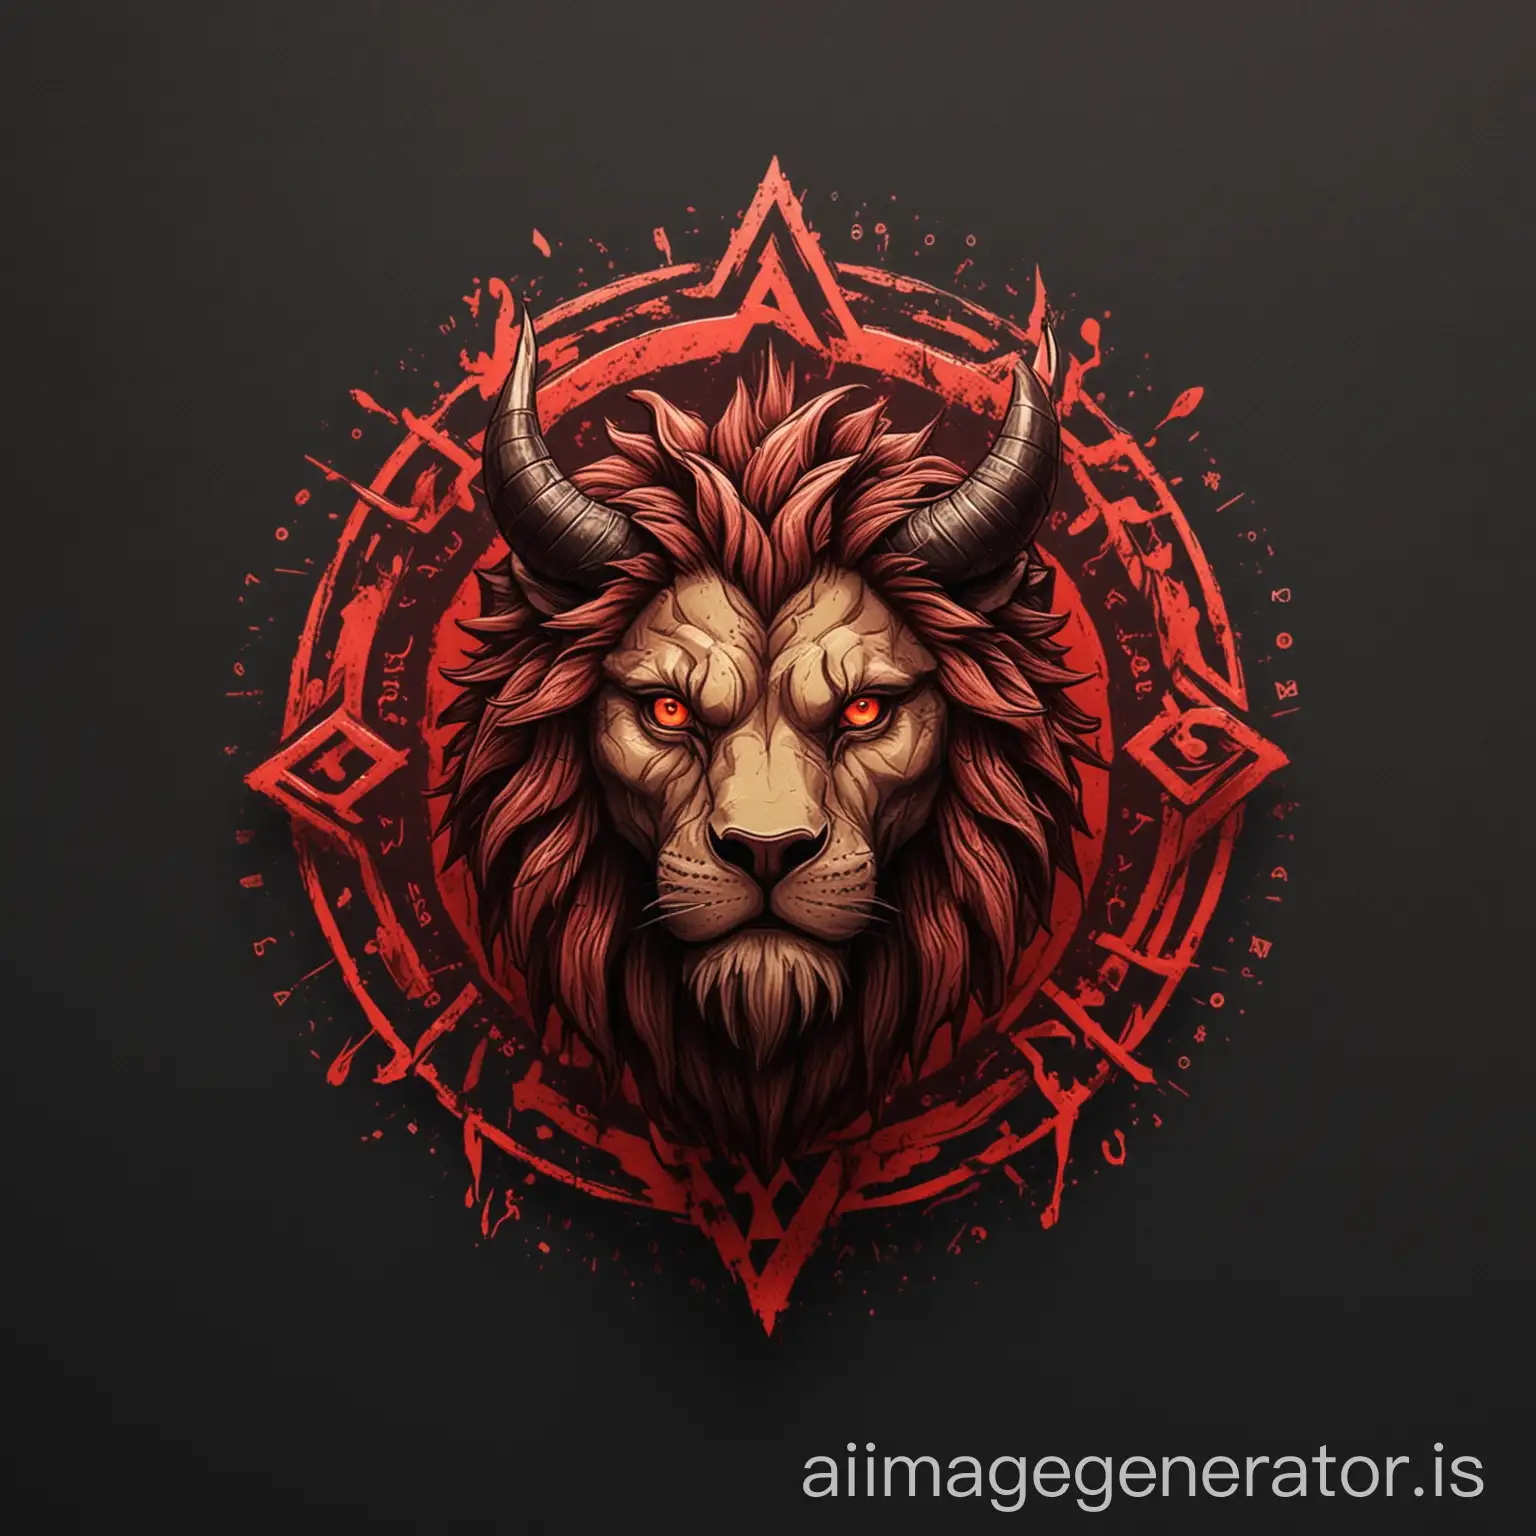 Draw a logo for a crypto exchange, named Bloods Bulls - and the logo itself on the theme of cryptocurrencies, the logo should be a lion with a reference to Satan and attract attention and title is the A i r d r o p LK. Make the logo in good quality.